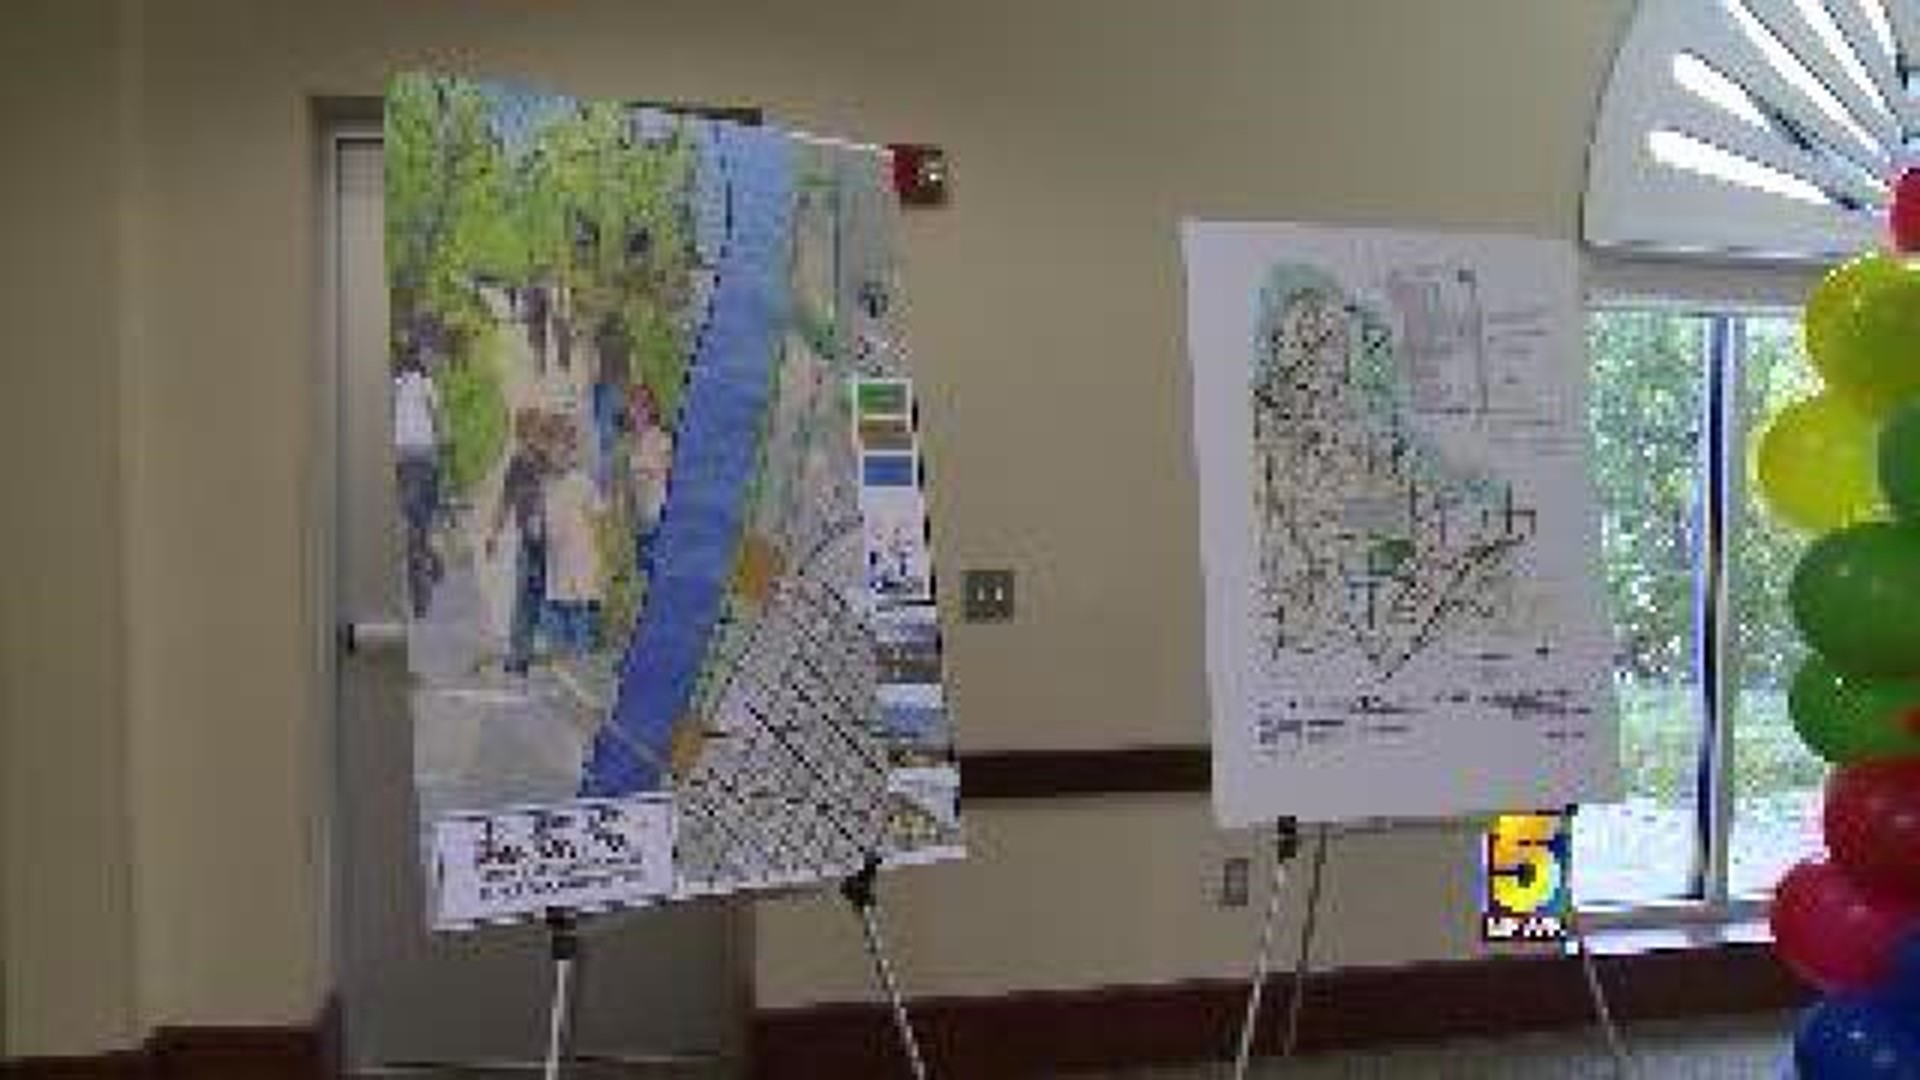 $1 Million Grant to Build Trail in Fort Smith